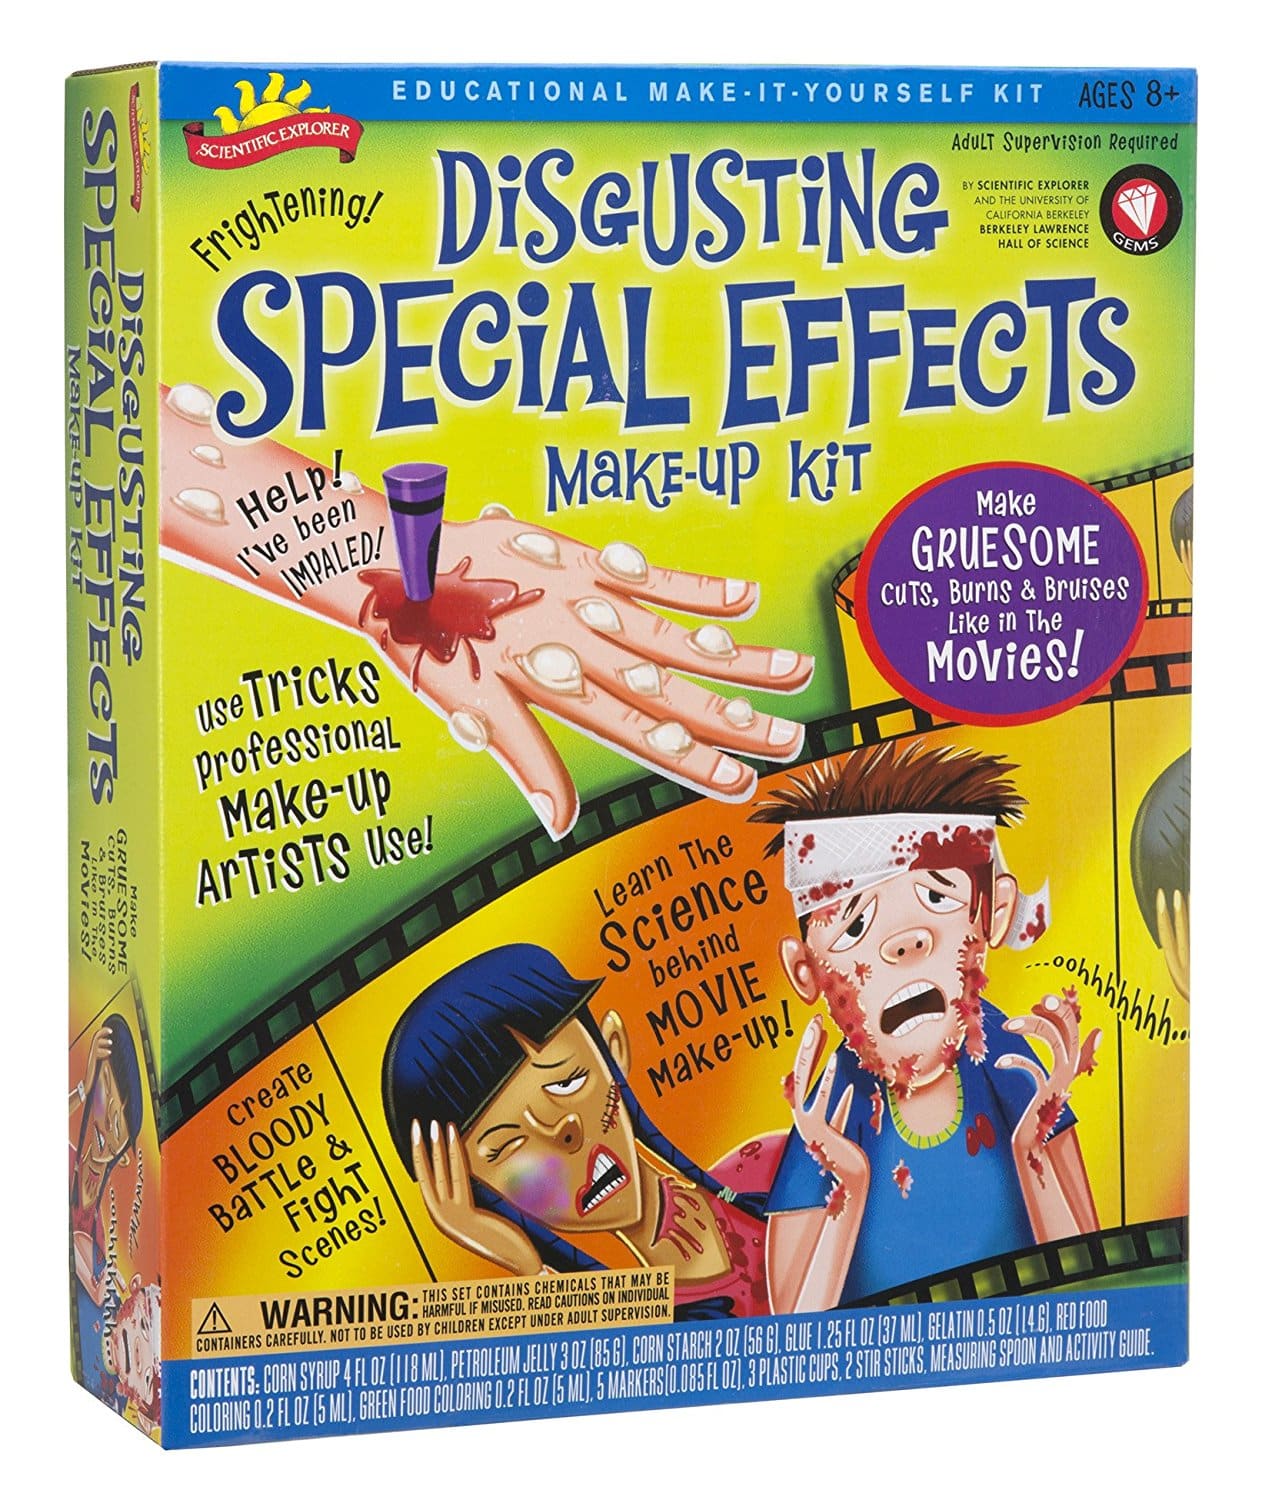 DEAL ALERT: Disgusting Special Effects Makeup Kit – 31% off